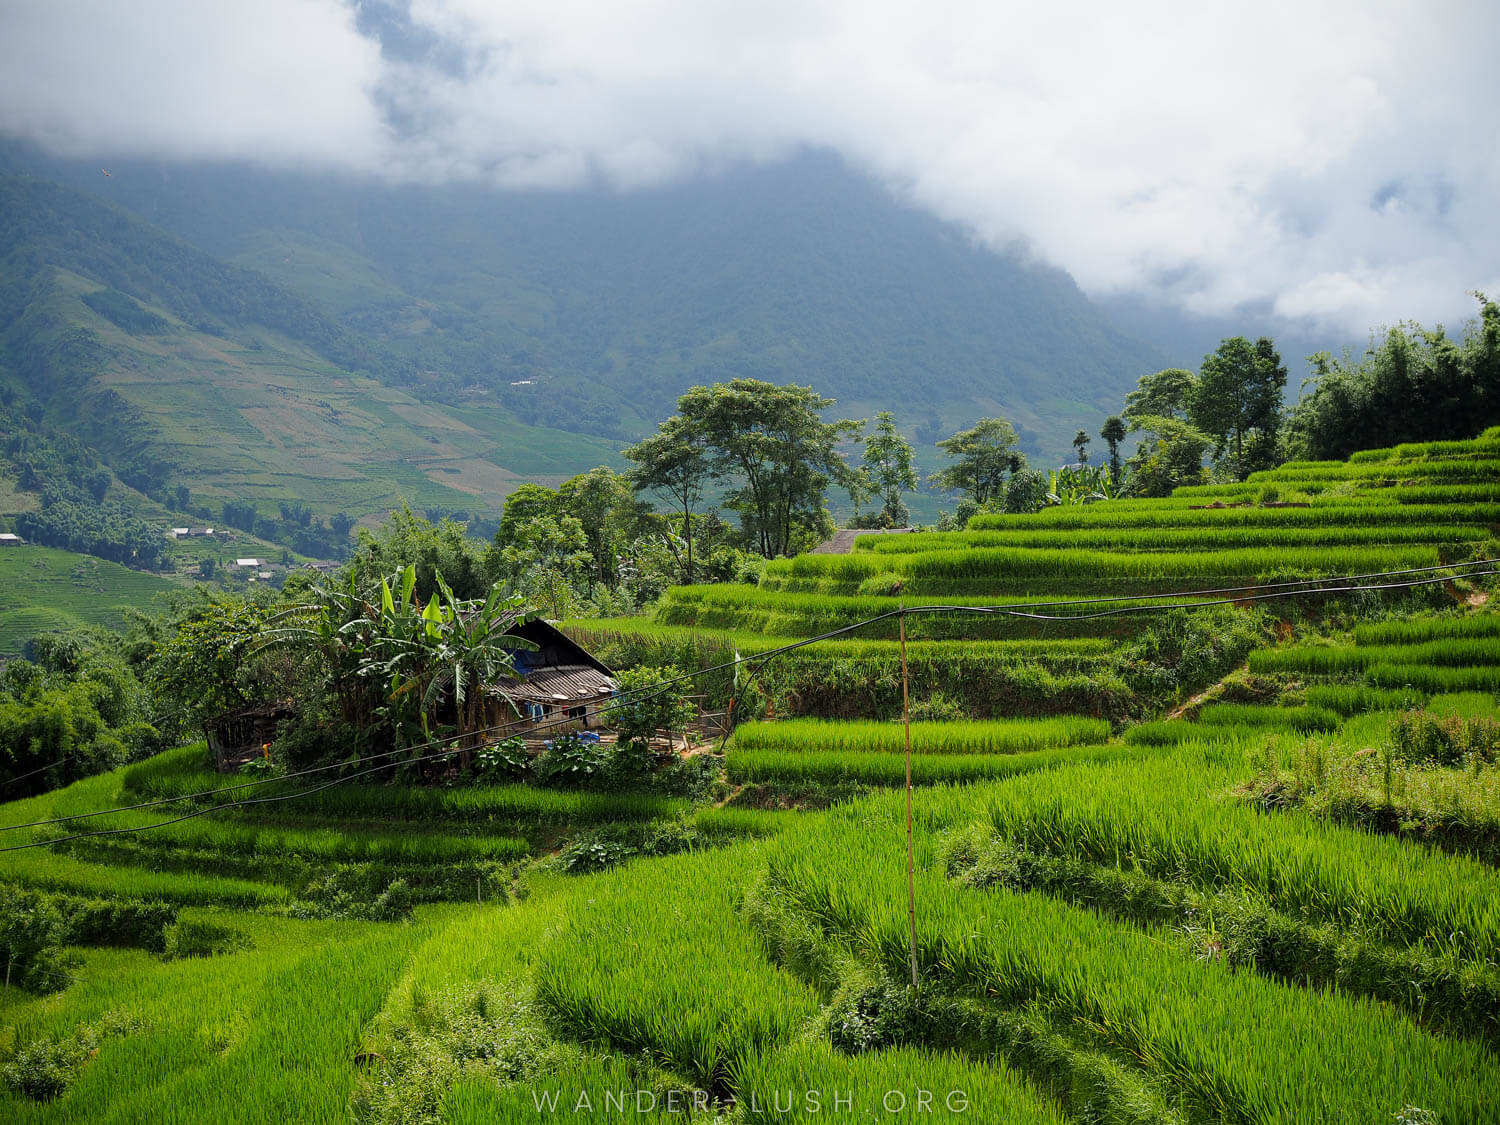 Planning a trek and wondering where to stay in Sapa, Vietnam? Sapa has a wide range of options for travellers—from hostels and hotels, to ecolodges, to family-run homestays. Here are some of the very best accommodations Sapa has to offer.